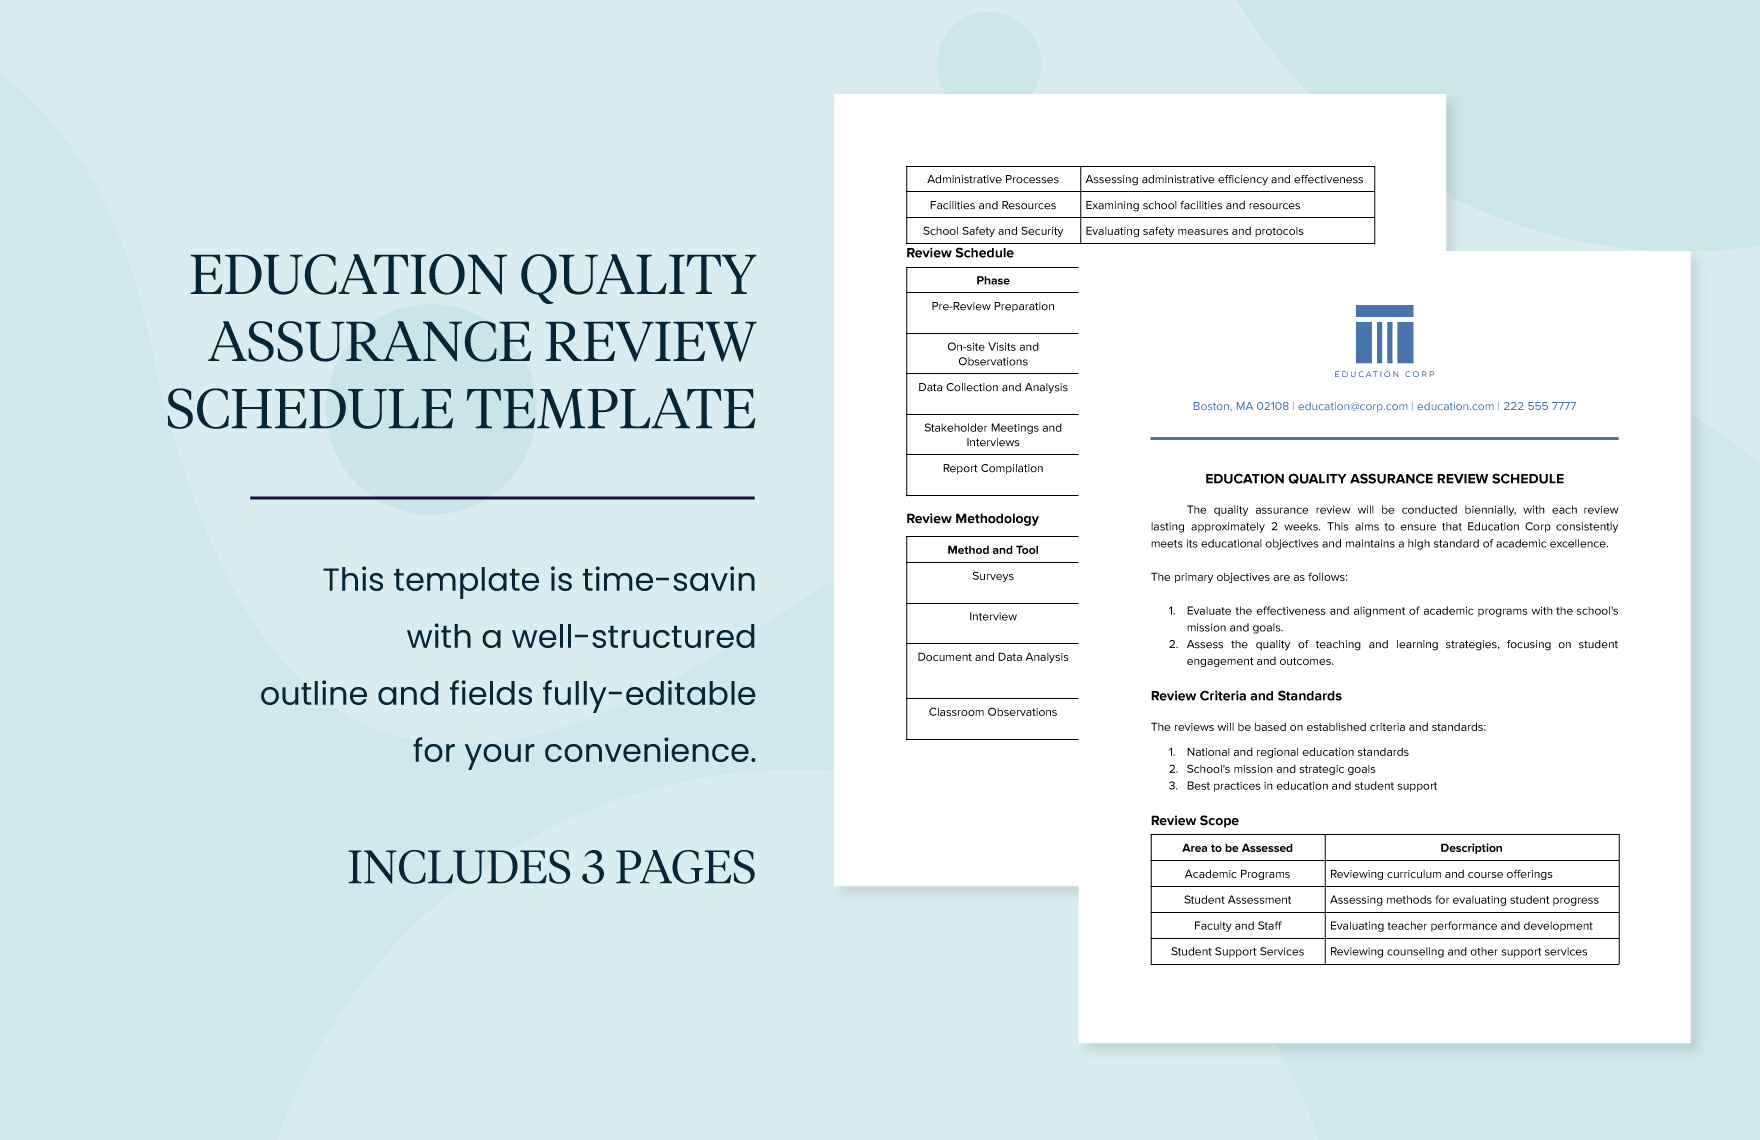 Education Quality Assurance Review Schedule Template